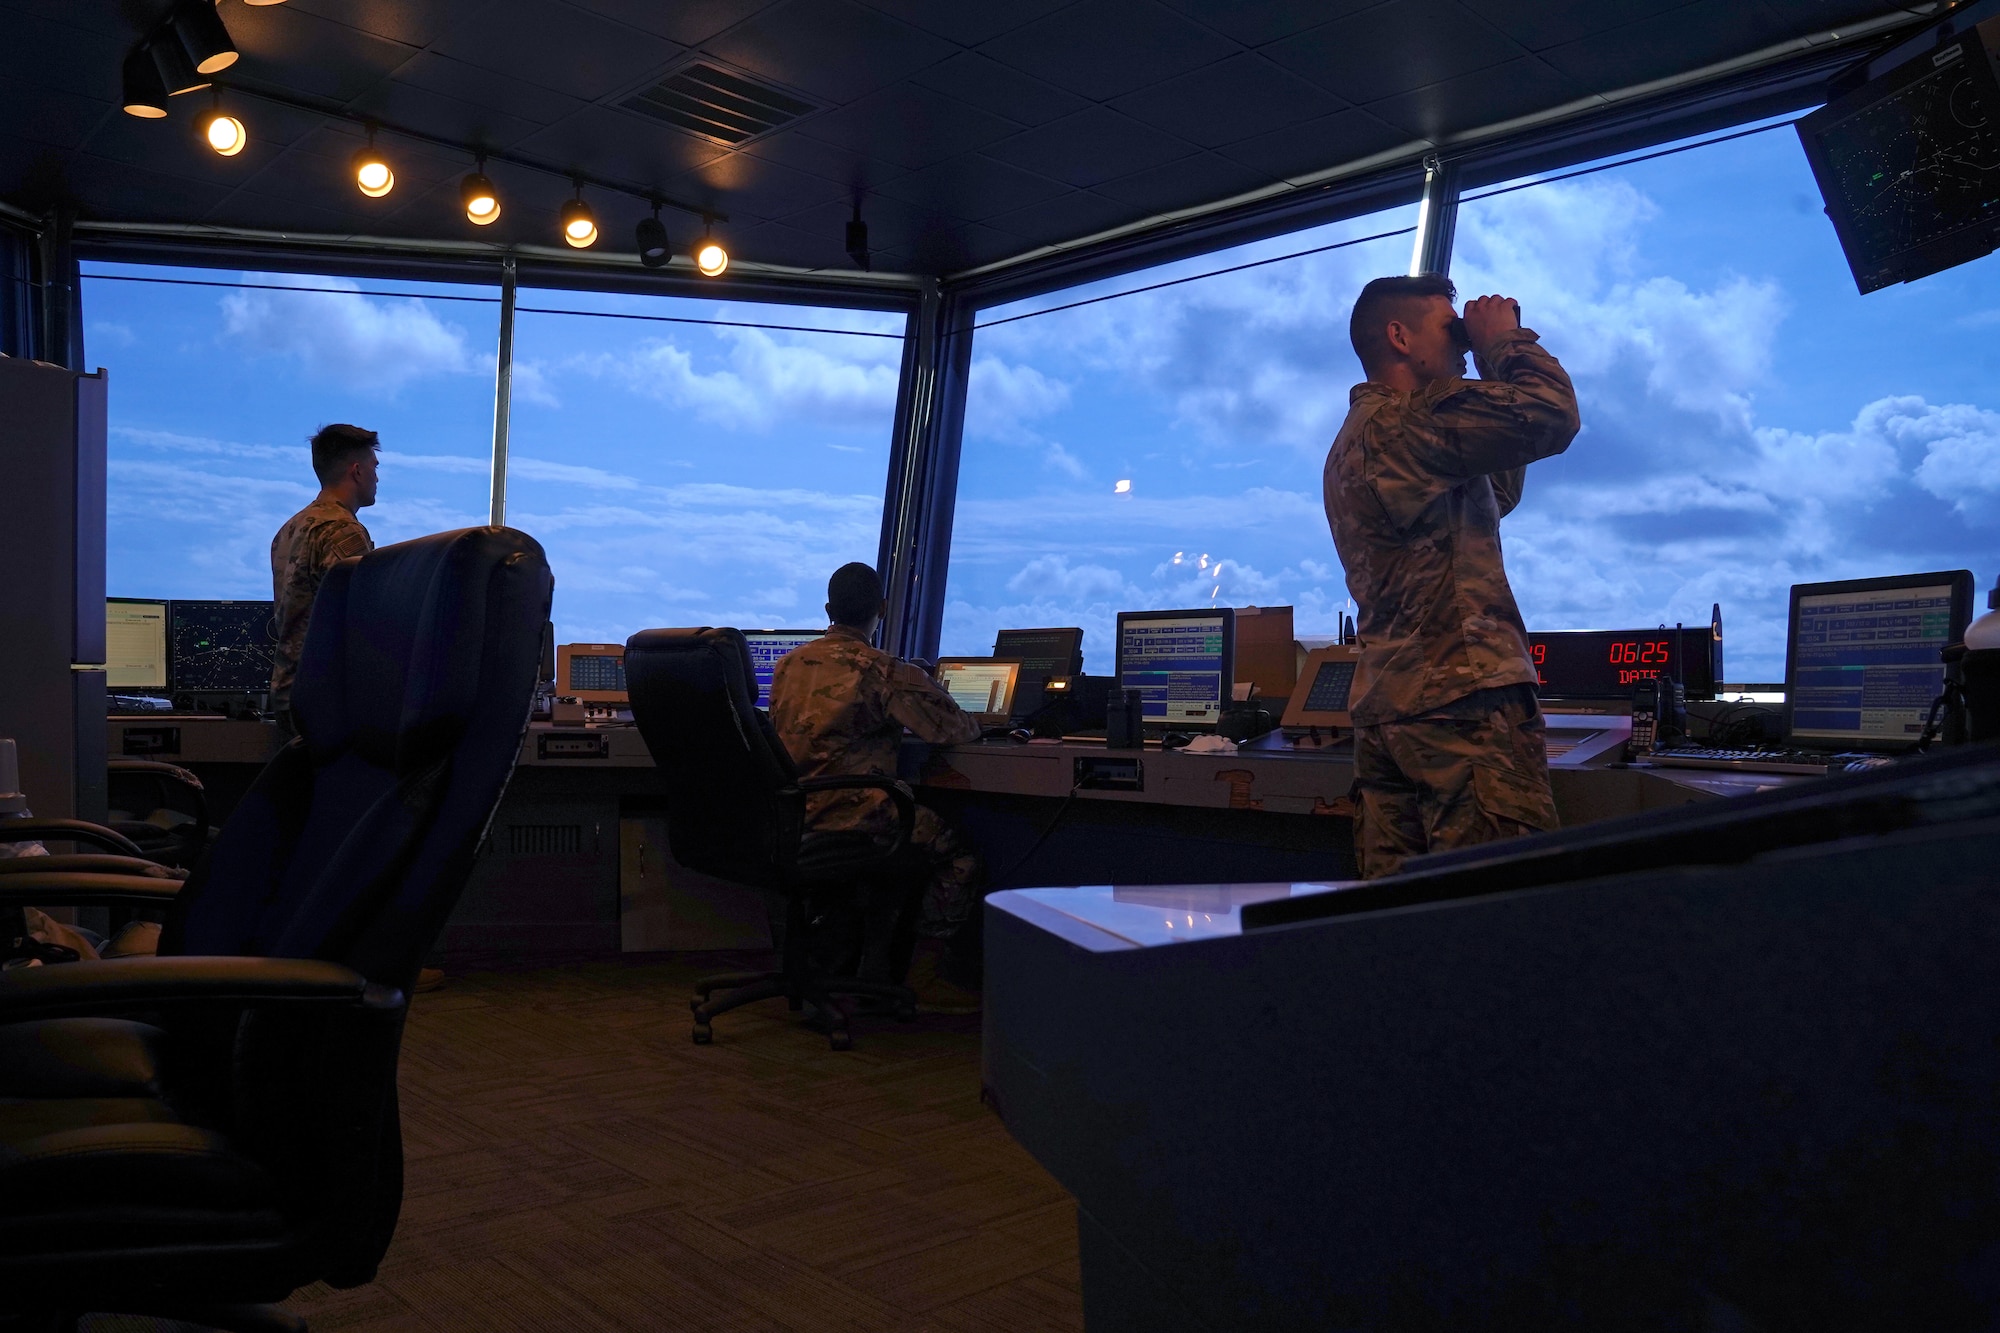 U.S. Air Force Staff Sgt. Brandon Ahuna, 81st Training Wing Operations Support Flight tower watch supervisor, Senior Airman Marcus Hamilton, 81st TRW air traffic control trainer, Airman 1st Class Jacob Penny, 81st TRW air traffic controller, work inside the Keesler Air Traffic Control tower at Keesler Air Force Base, Mississippi, June 25, 2021. The 81st TRW OSF traffics the aircraft on the Keesler flightline and the local airspace. (U.S. Air Force photo by Senior Airman Seth Haddix)